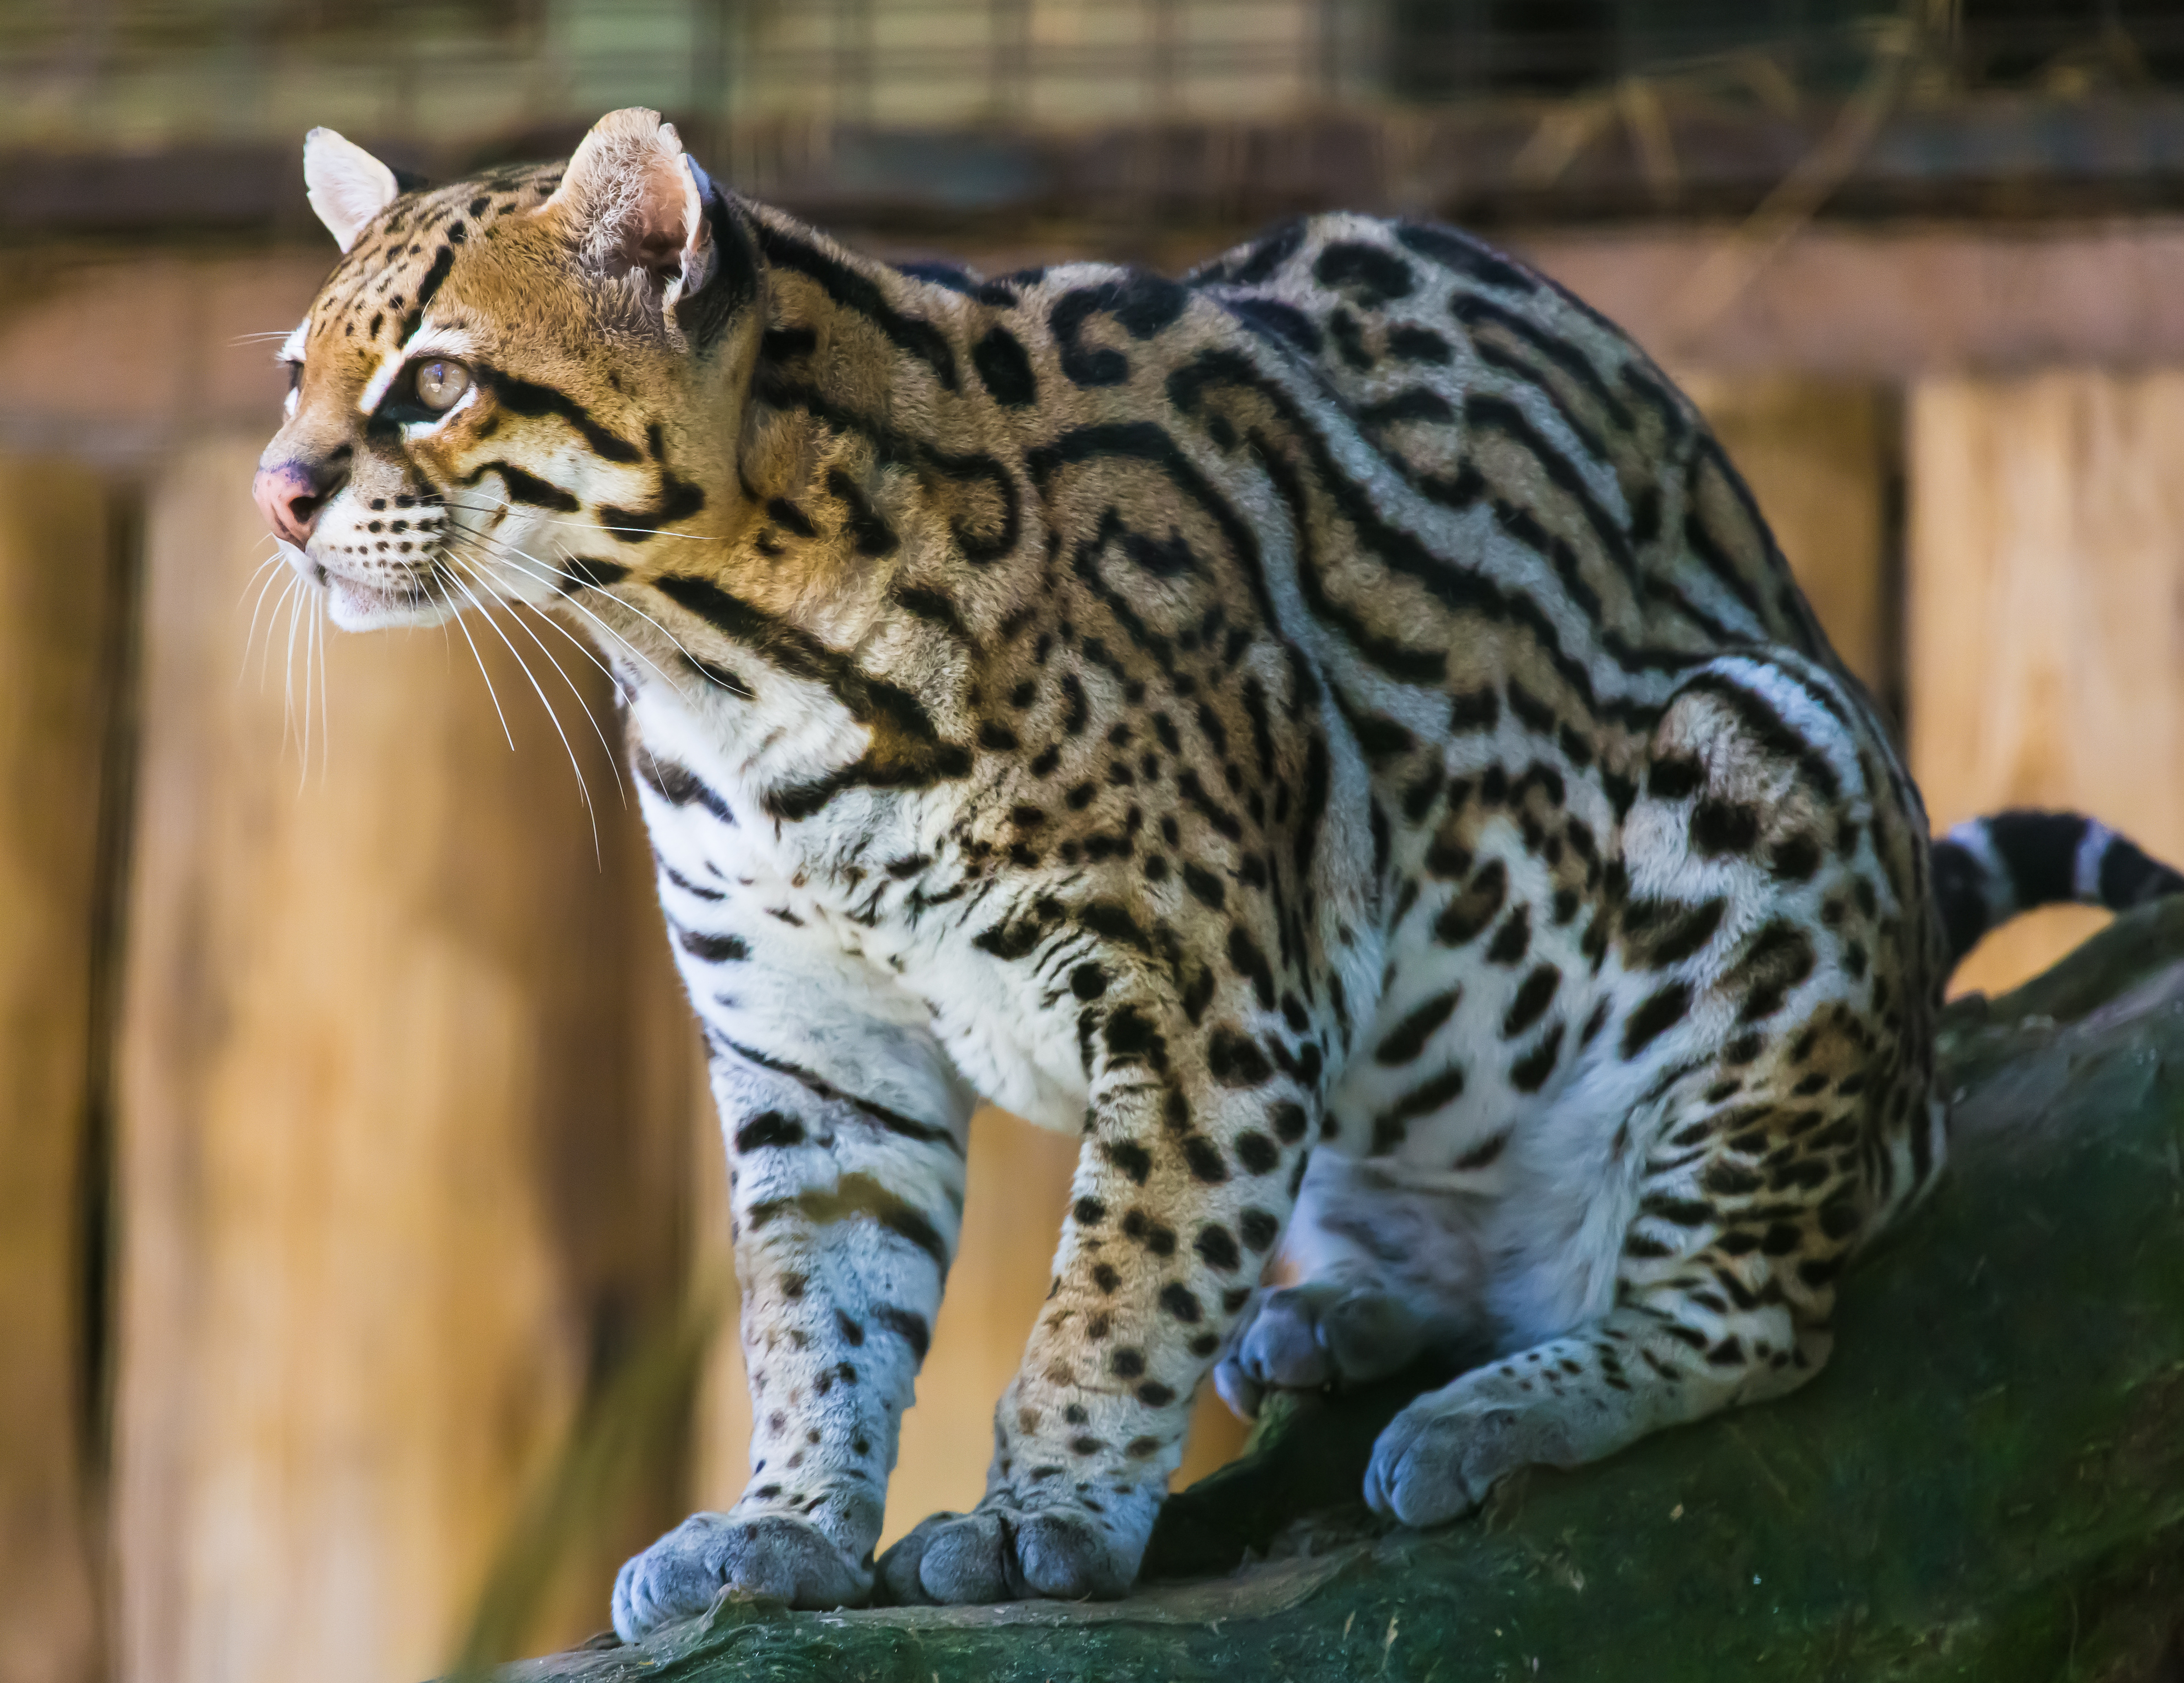 What is a group of ocelots called?